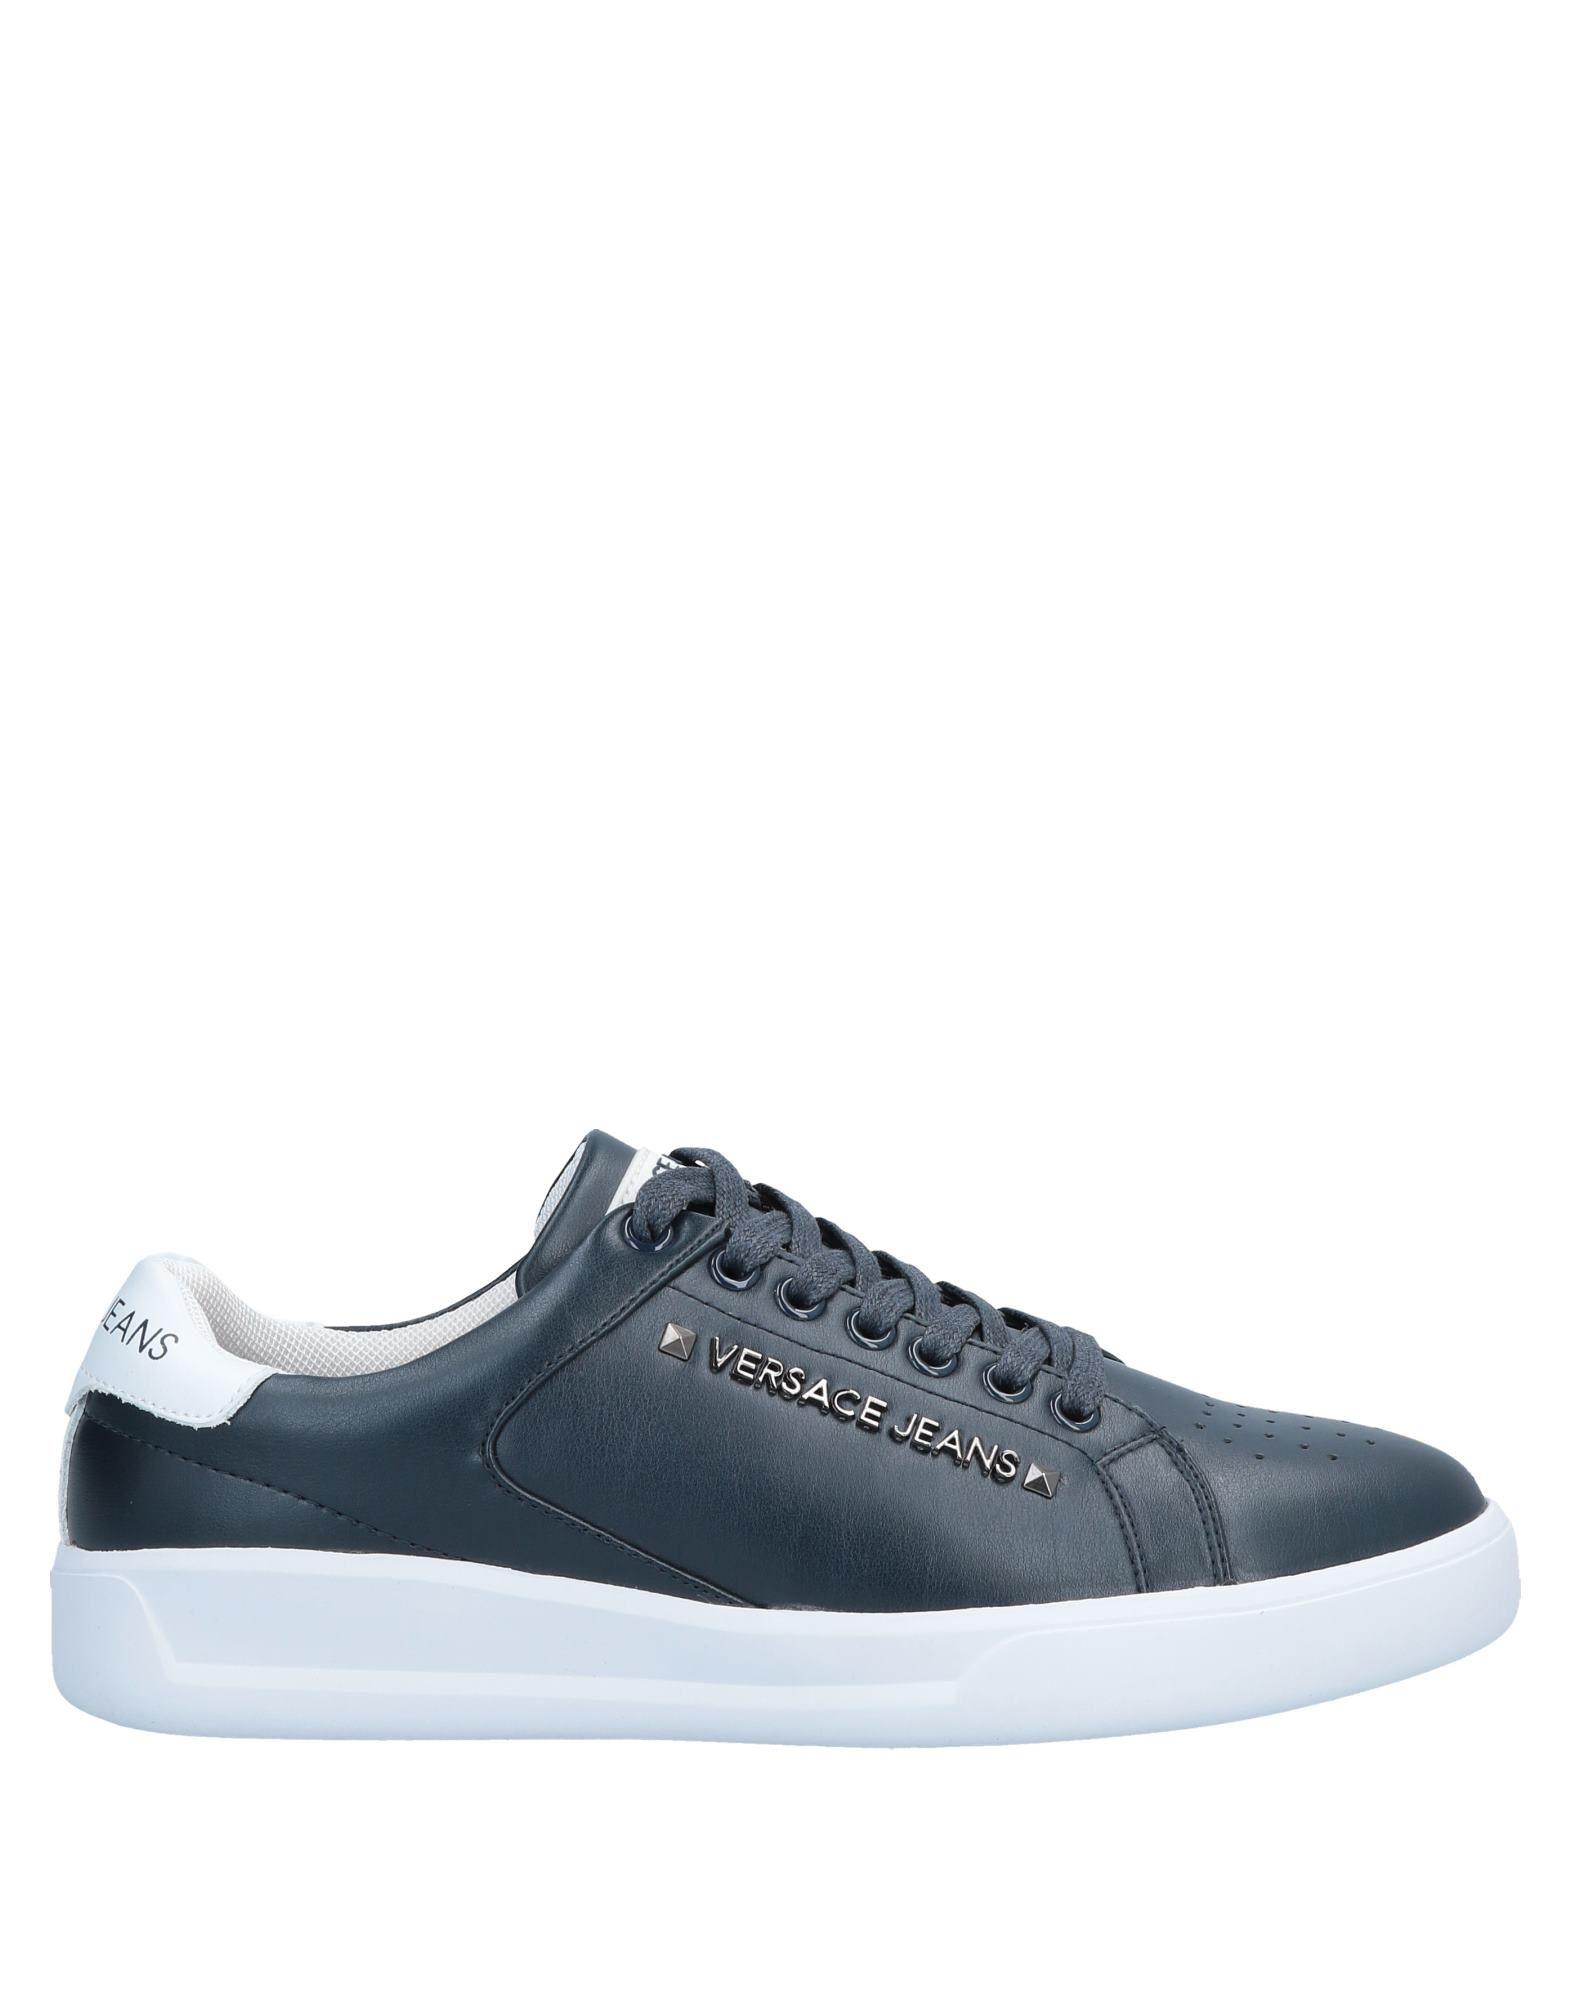 Versace Jeans Leather Low-tops & Sneakers in Dark Blue (Blue) for Men ...